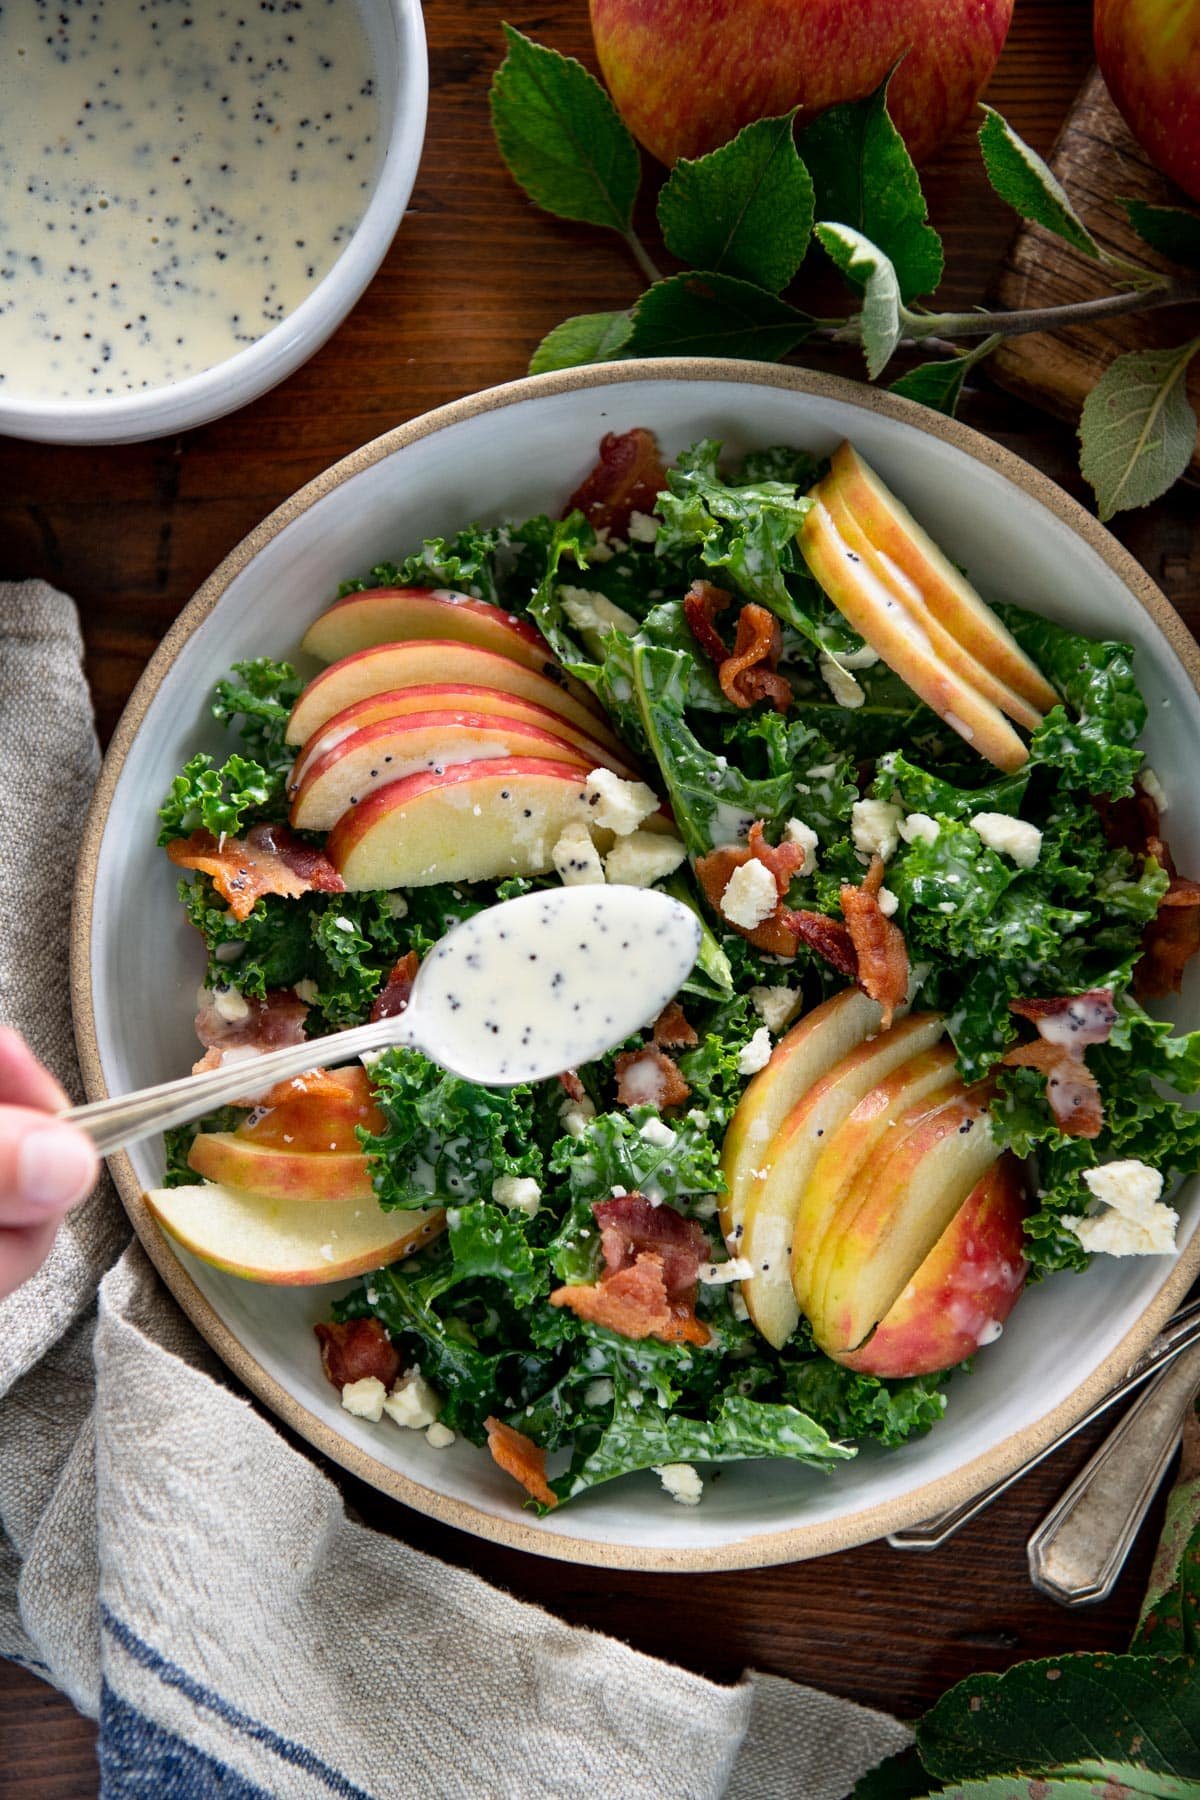 Hand dressing kale apple salad with creamy poppy seed dressing.